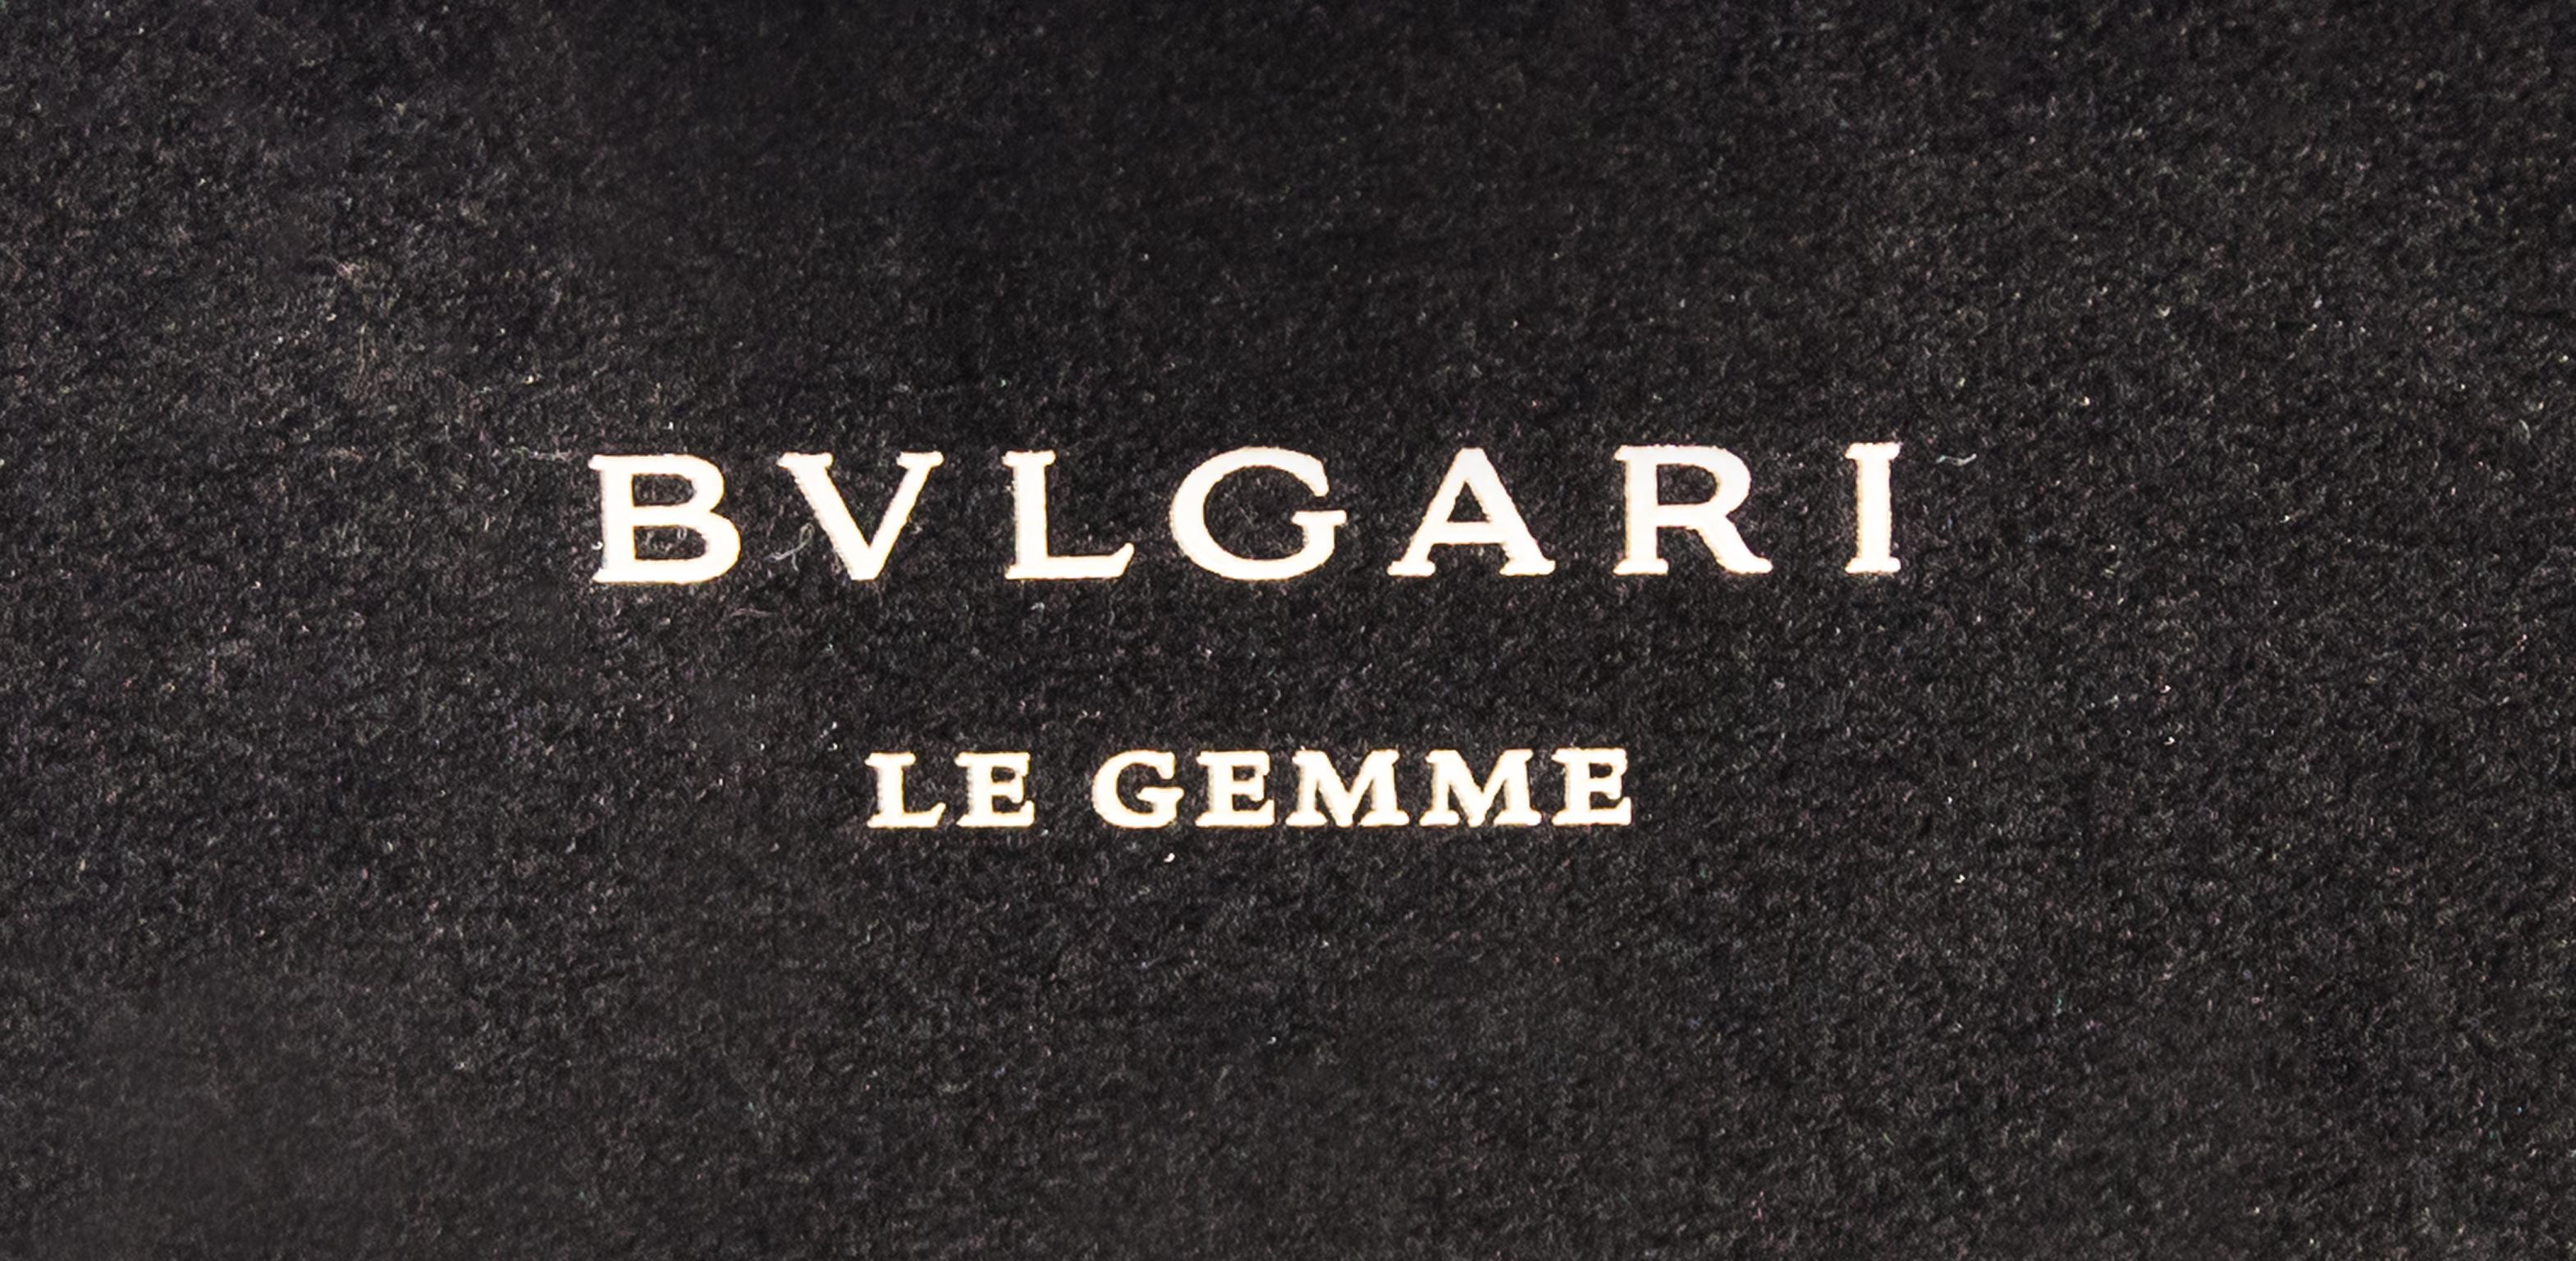 Huge Bvlgari China Lacquer Jewelry Le Gemme Box For Sale 3